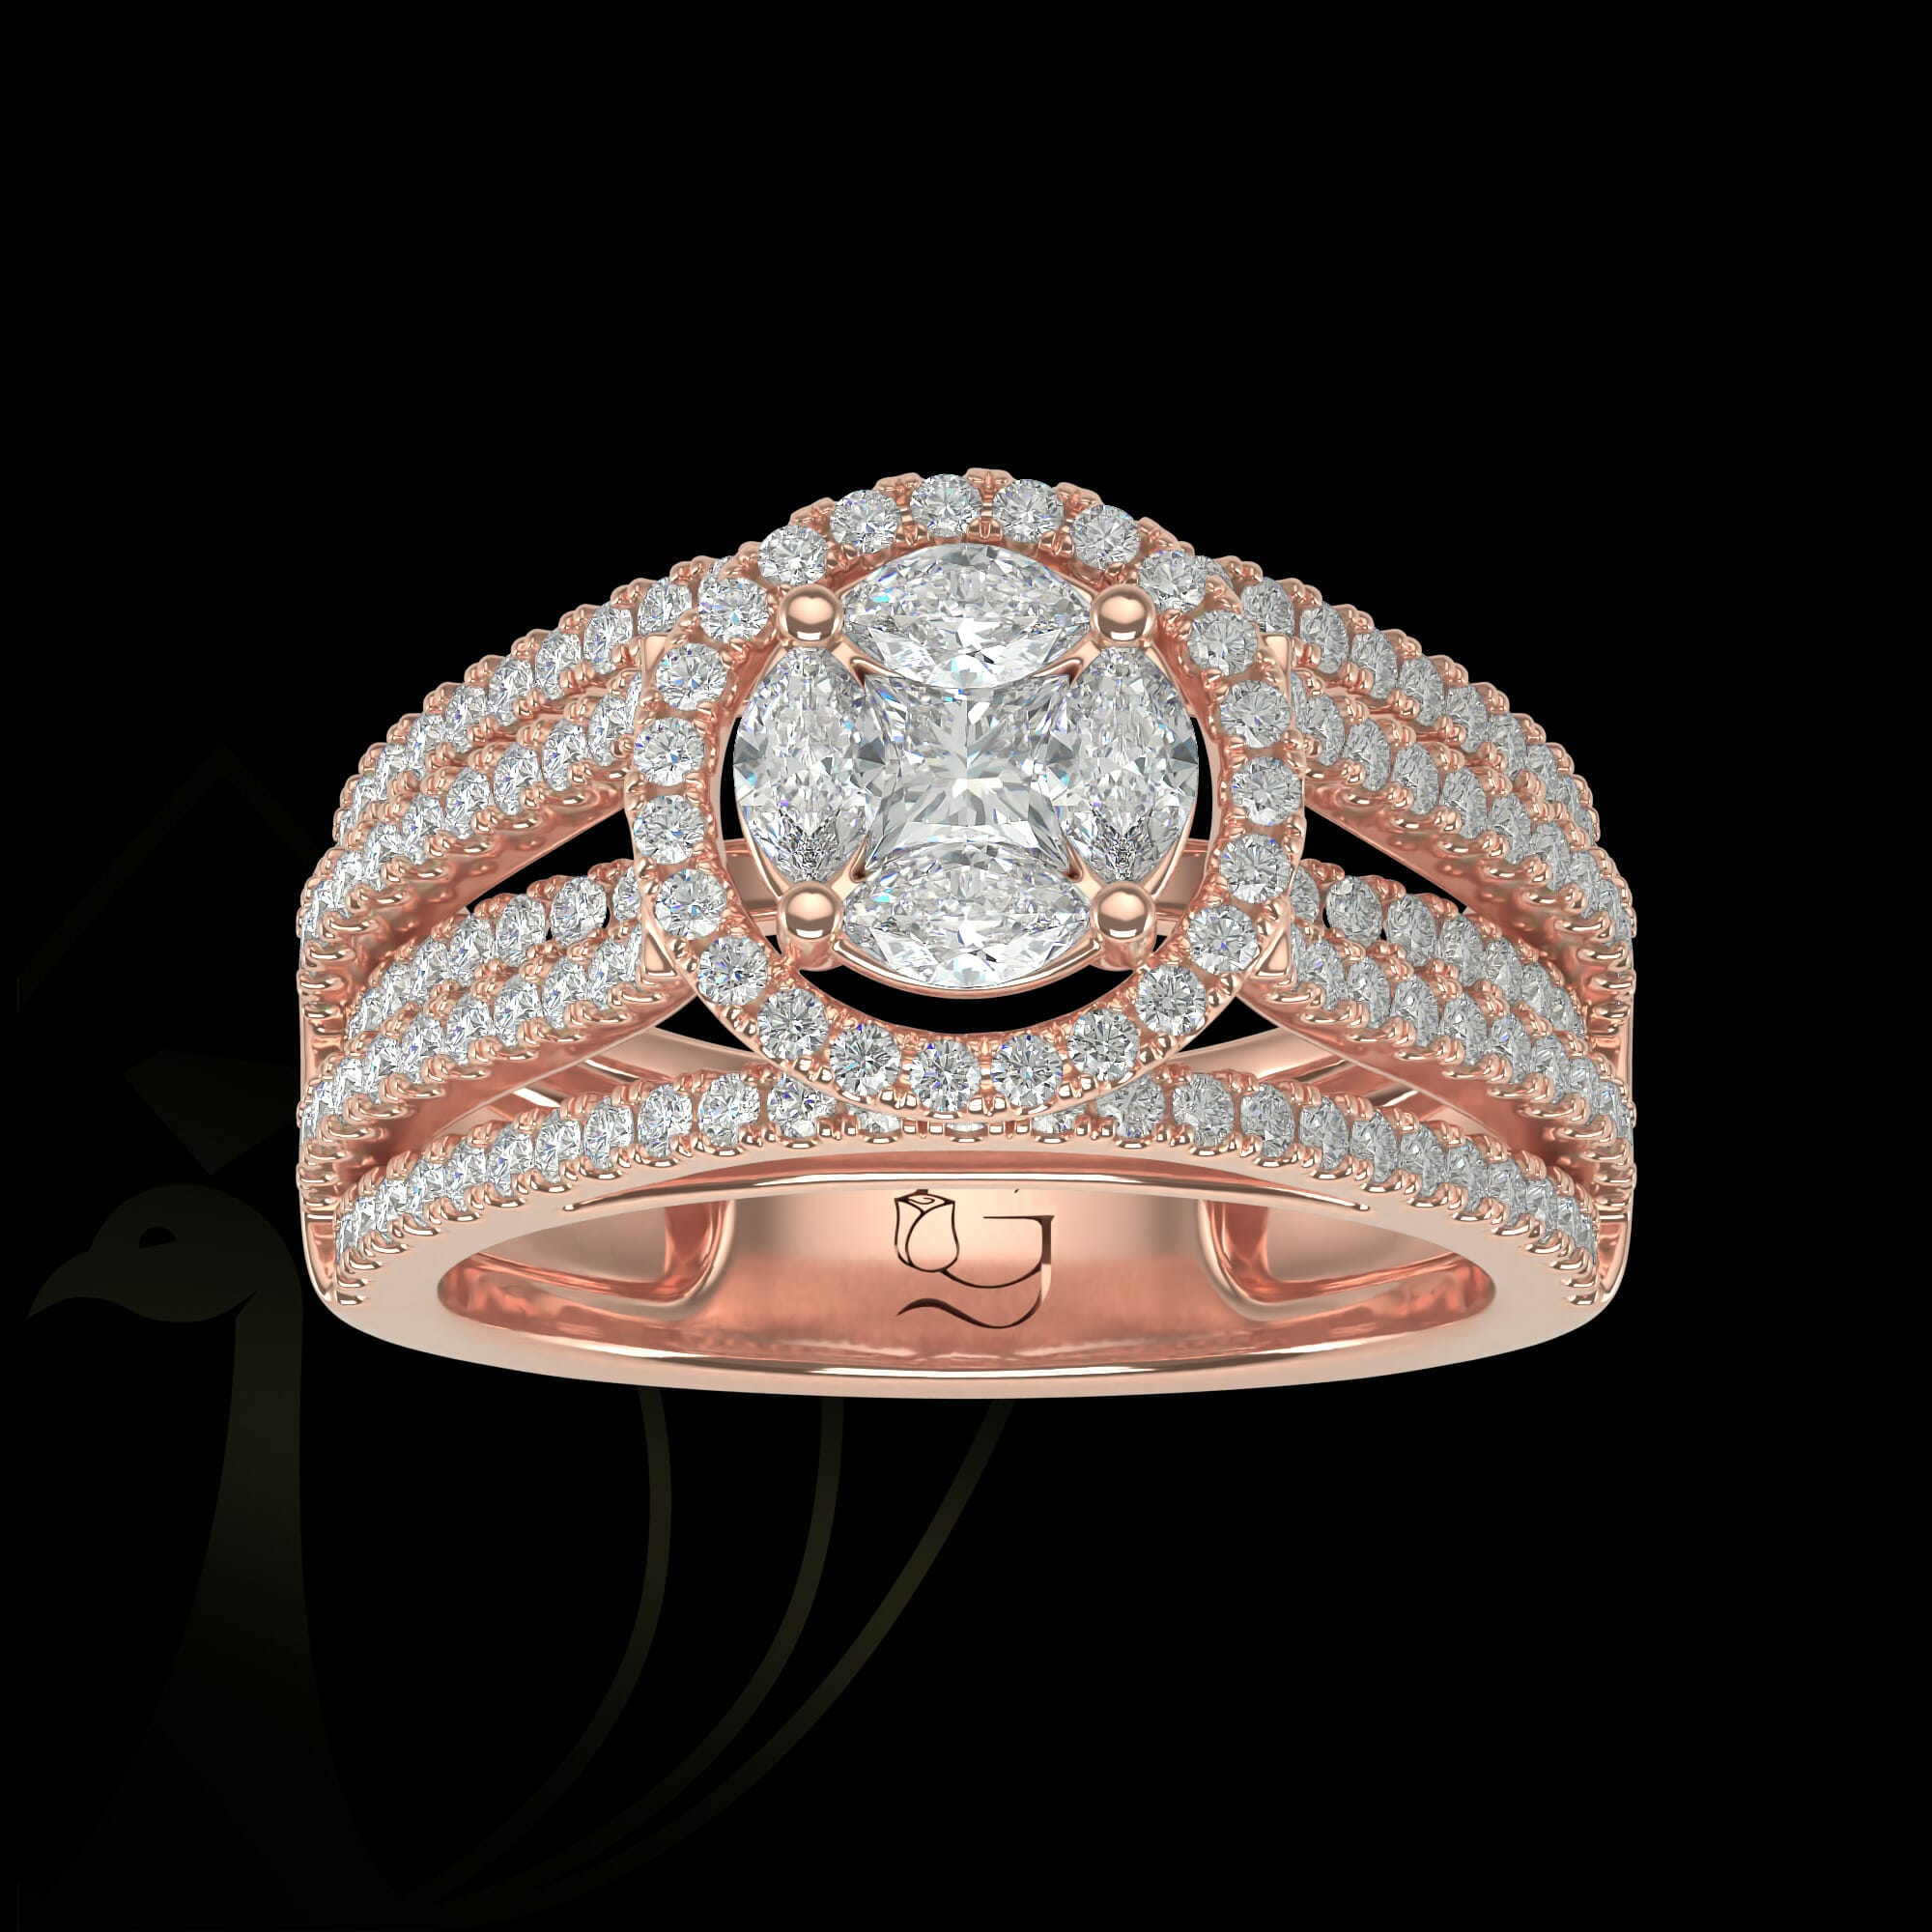 Rays of Happiness Diamond Ring from our exclusive Gulz Collection